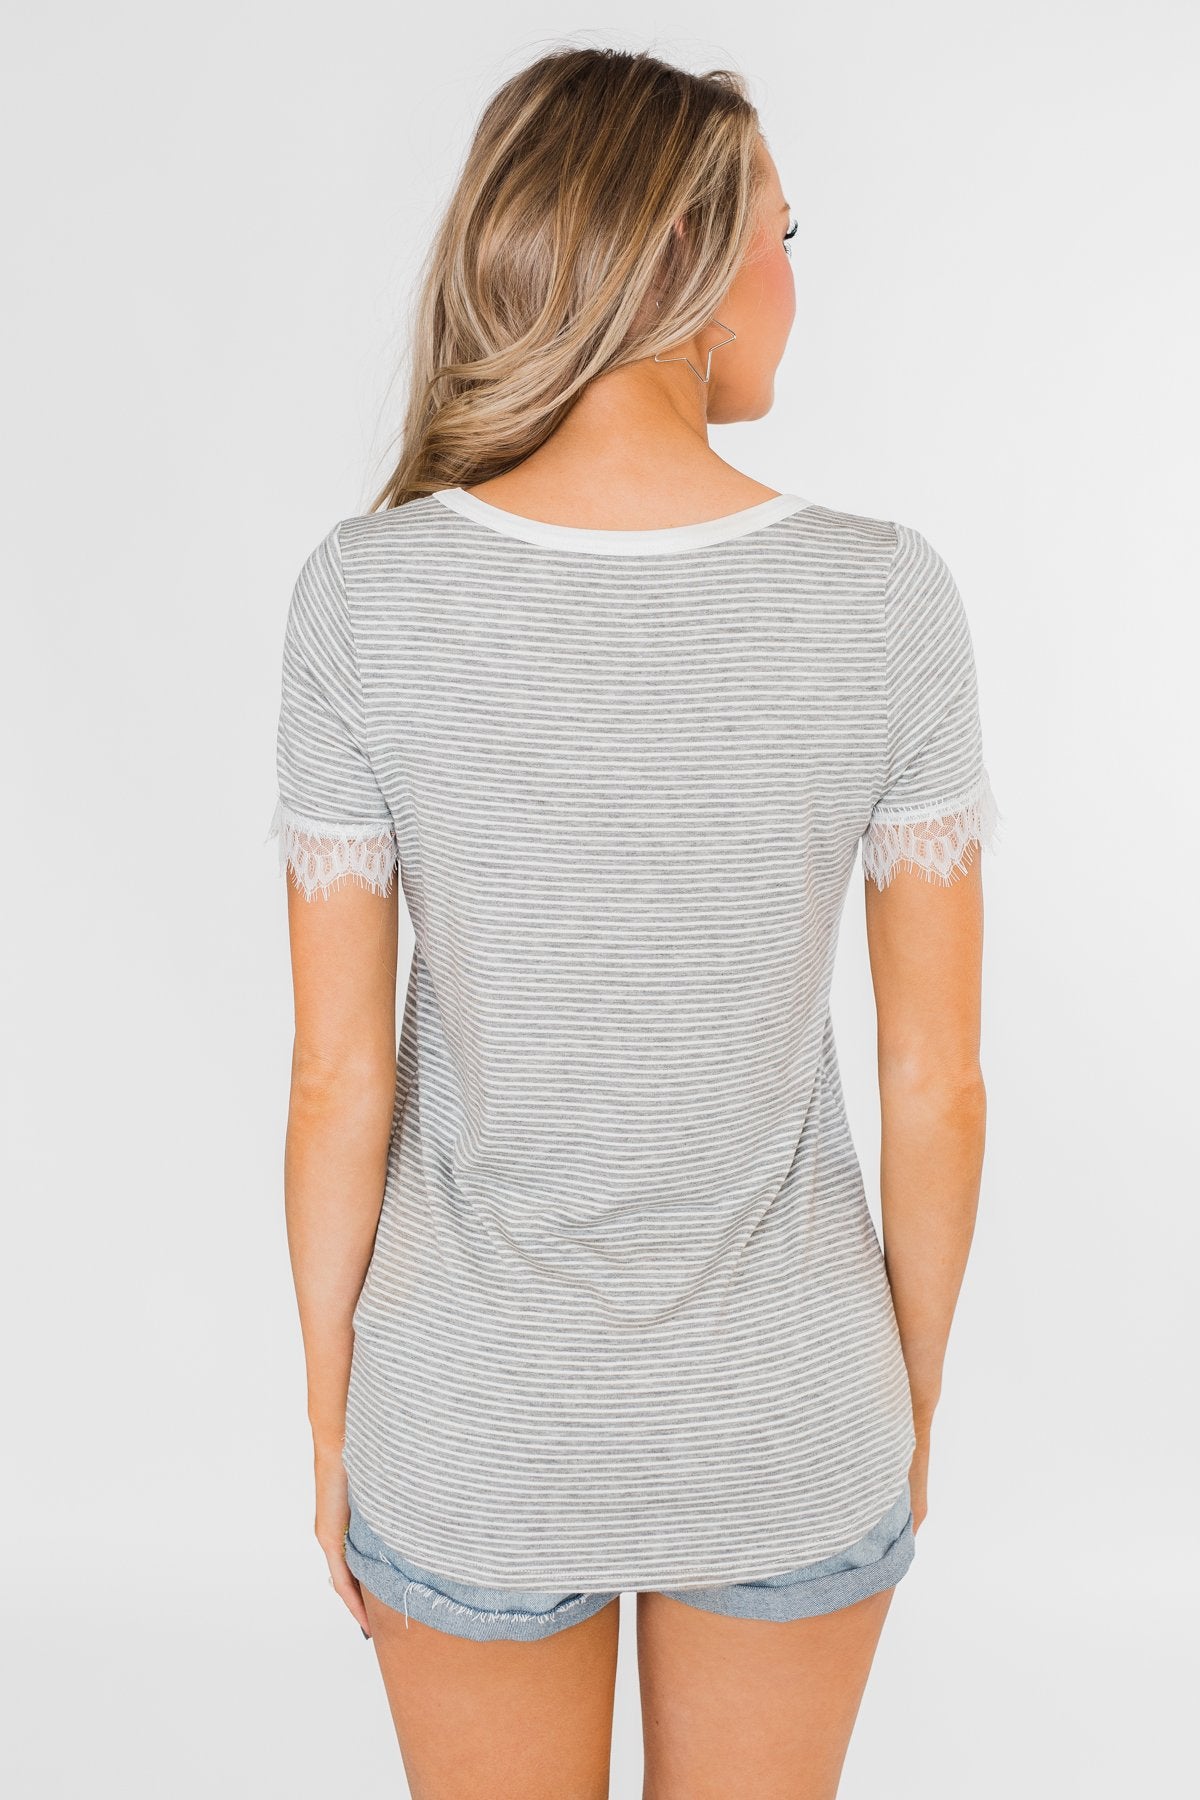 All About the Accents Lace Striped Top- Grey & White